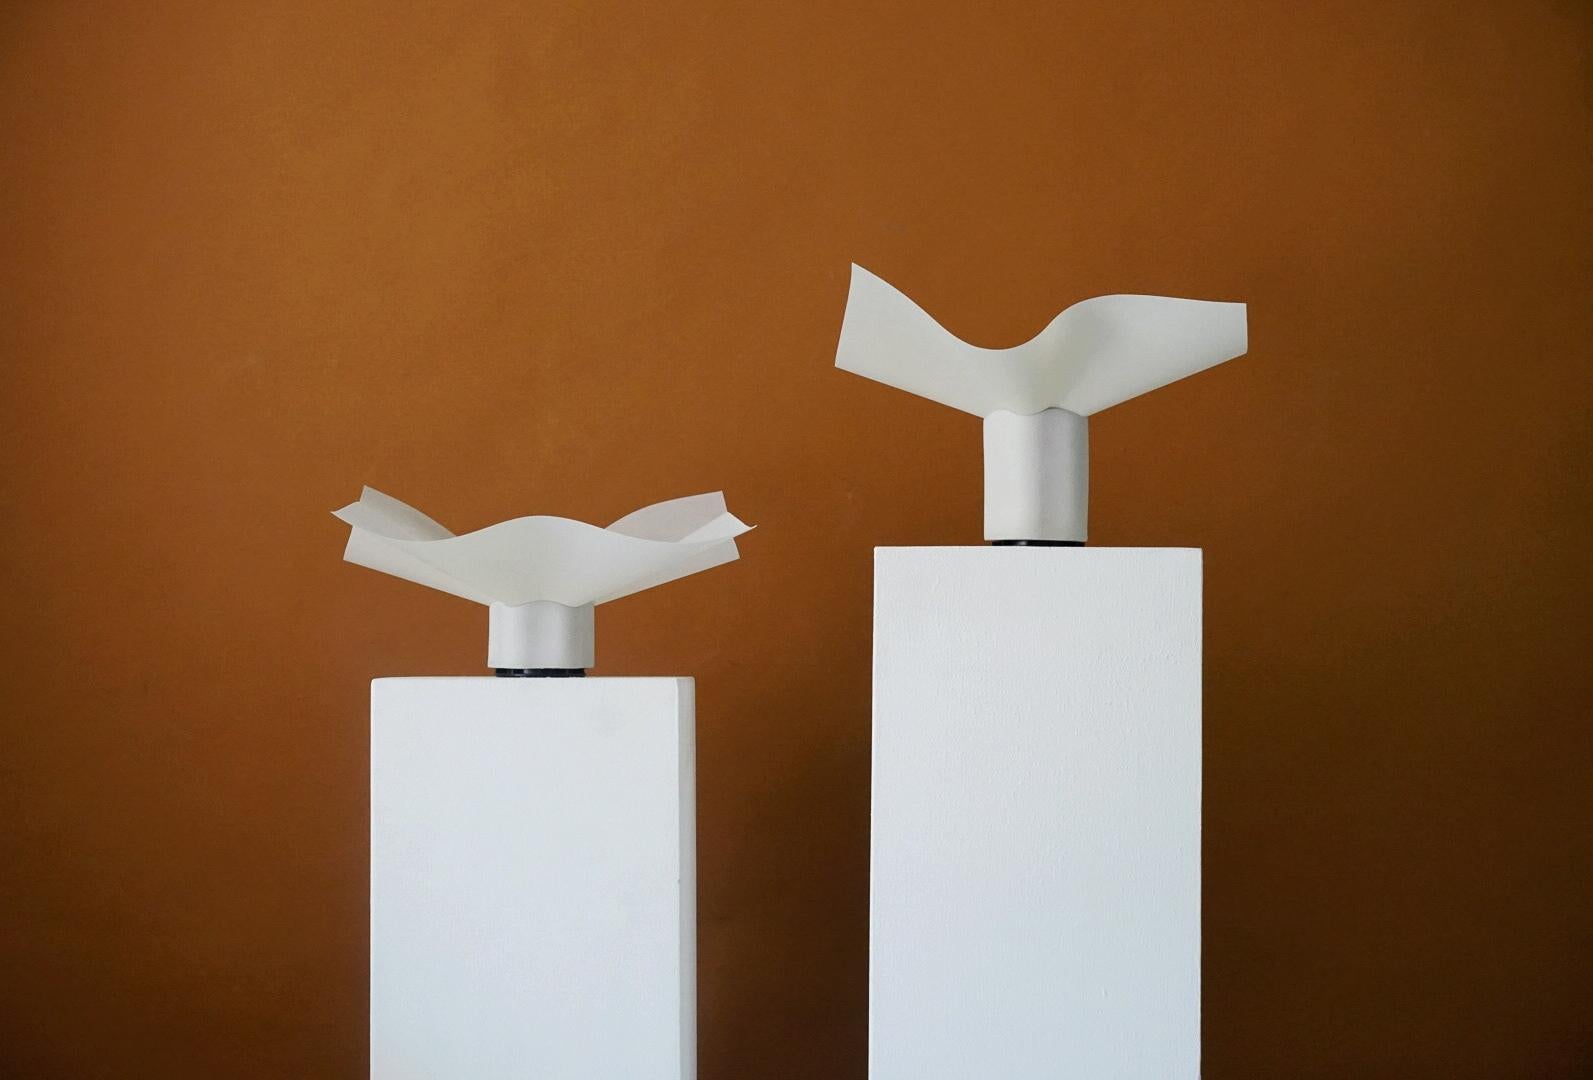 Rare pair of Mario Bellini pair of table lamps, Model Area 10 & Model Area 20, by designer Mario Bellini for Artemide, the 1970s. The Pair have a different height which makes them as a pair or grouping look special. This beautiful design by Mario